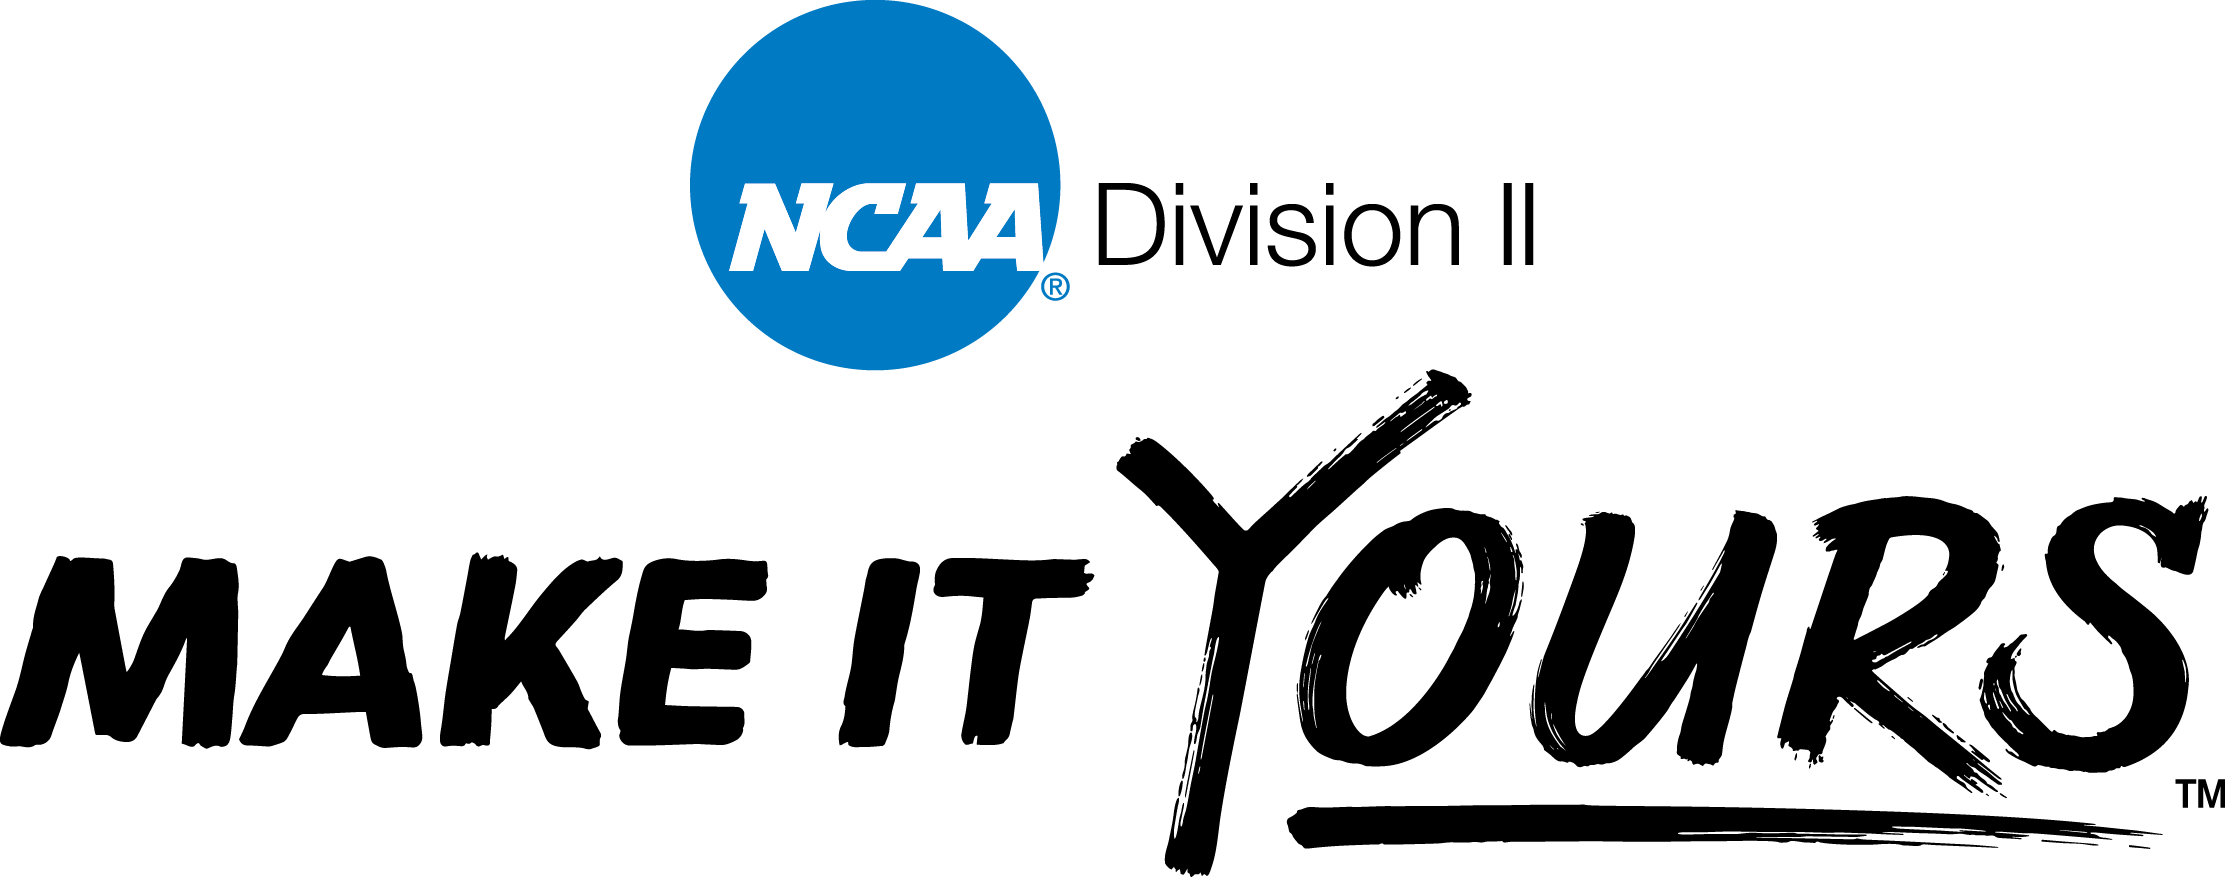 NCAA Logo - Division II begins rollout of 'Make It Yours' logo | NCAA.org - The ...